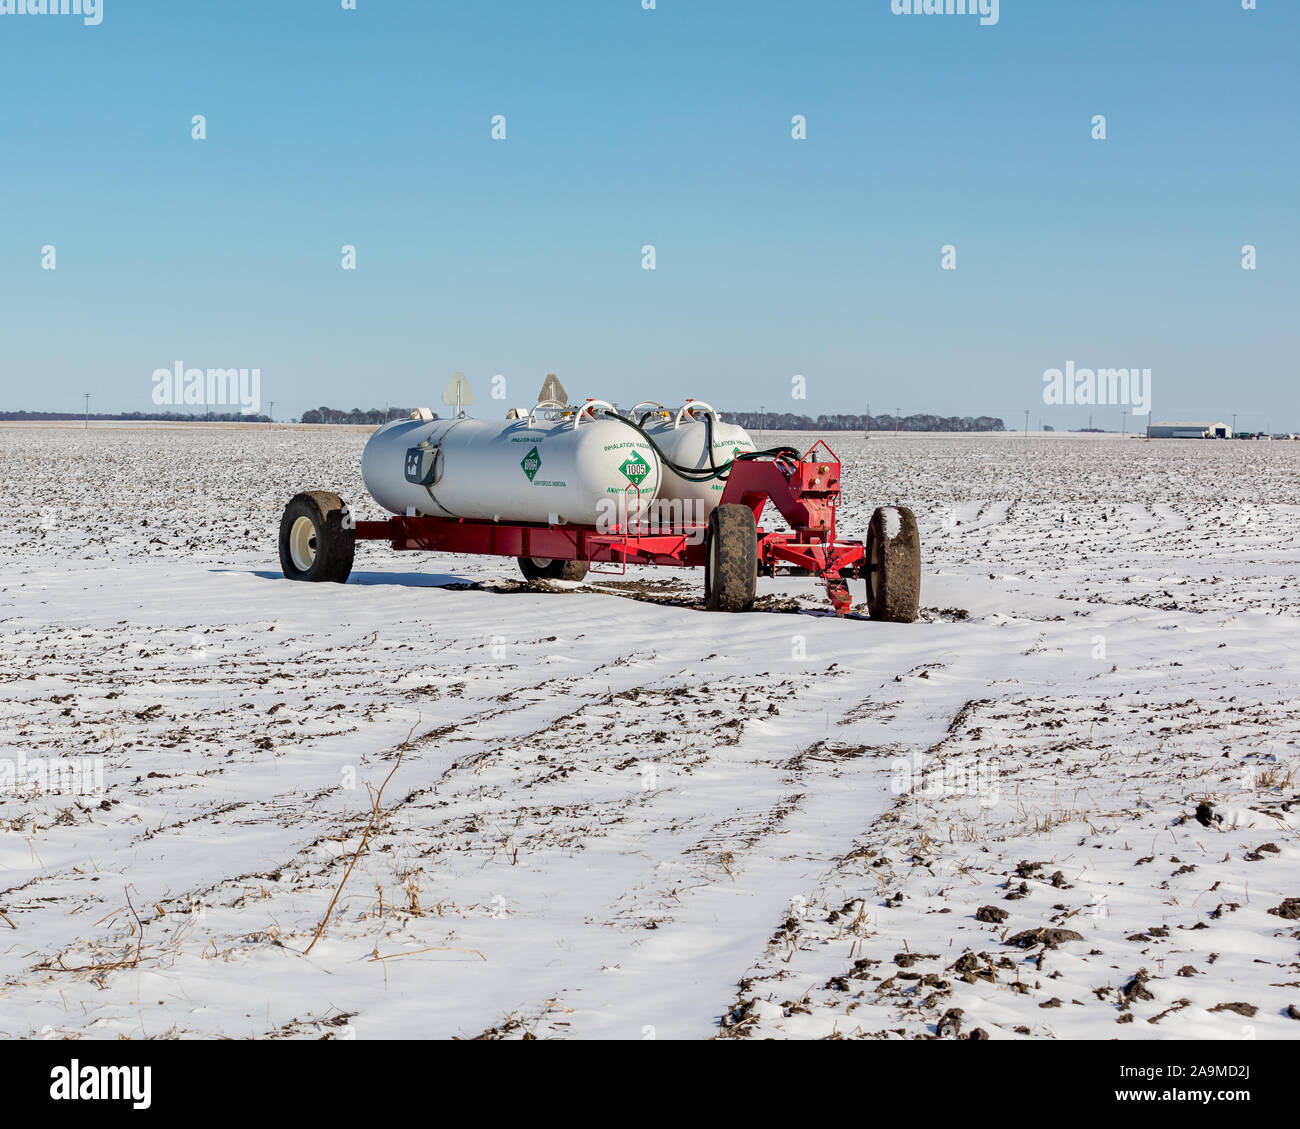 Anhydrous ammonia fertilizer tanks and wagon in harvested soybean farm field covered in snow after an early winter snowstorm Stock Photo